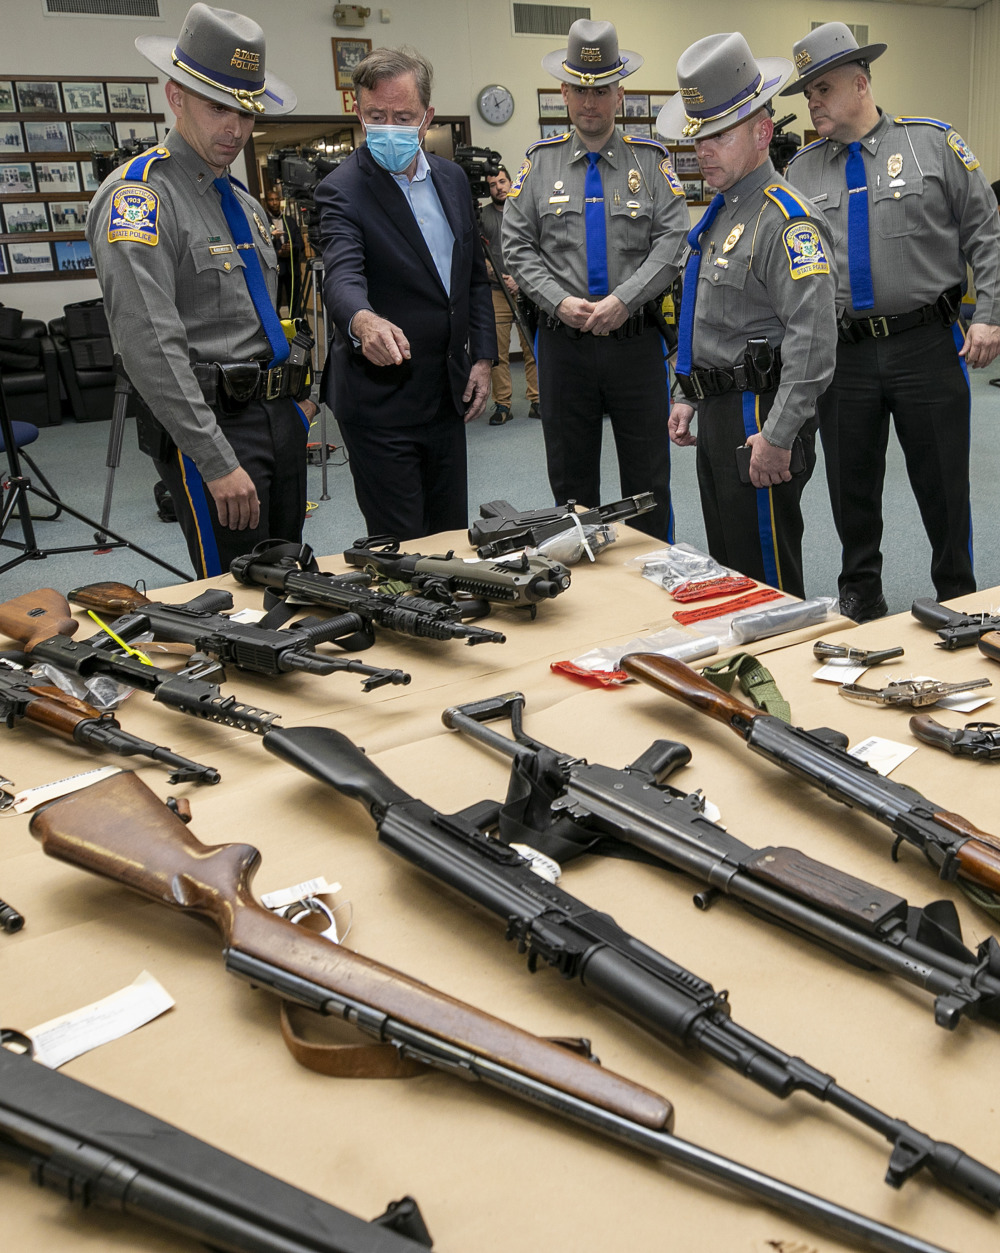 Gun control across the nation: Several men in law enfrement uniforms and one man in a dark suit stand looking down at two tables where numerous guns are laid out.